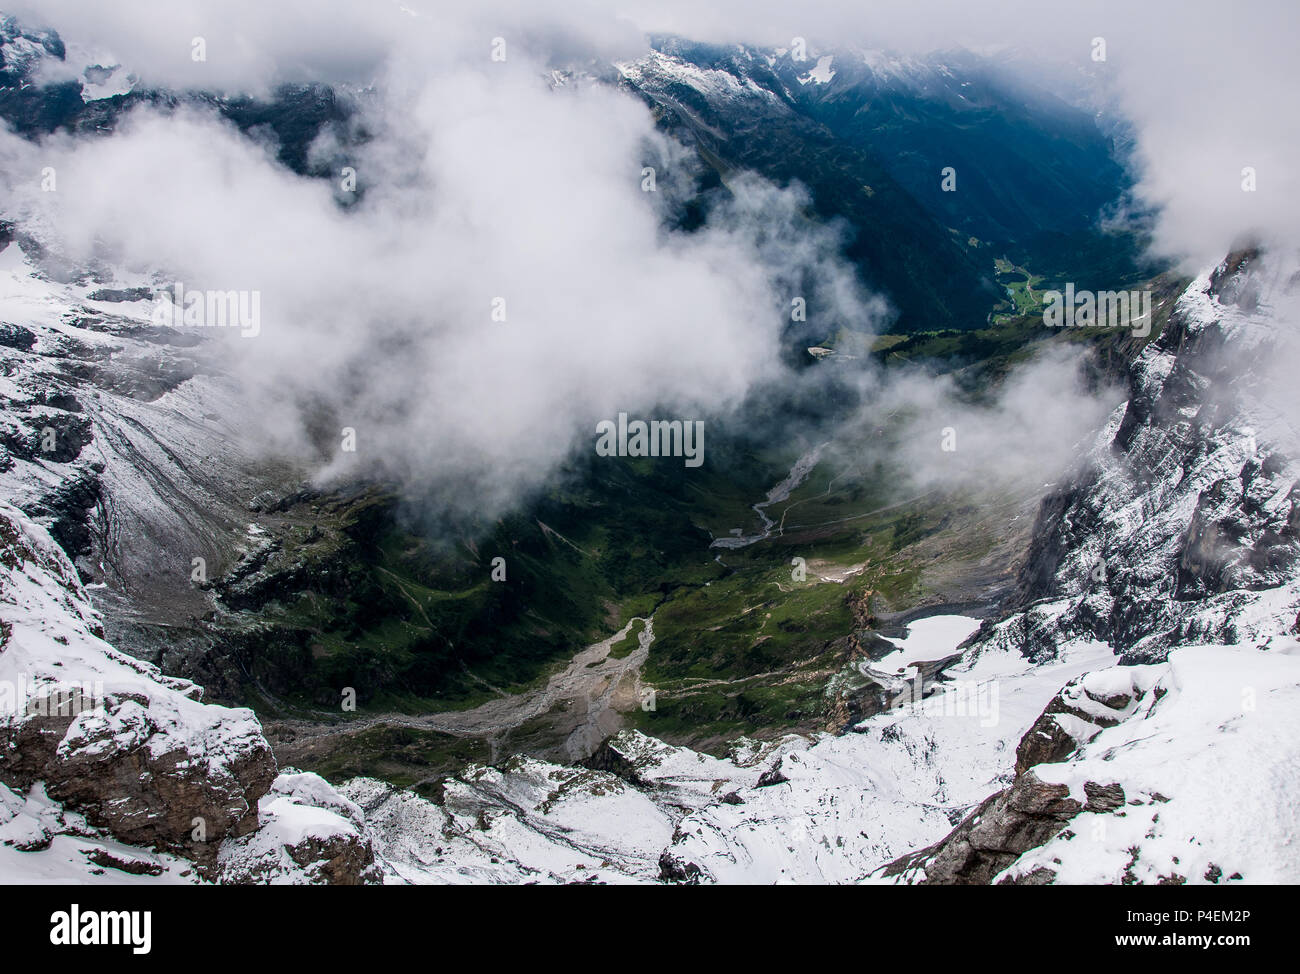 Aerial View Of Mountain Valley Landscape From Mount Titlis Images, Photos, Reviews